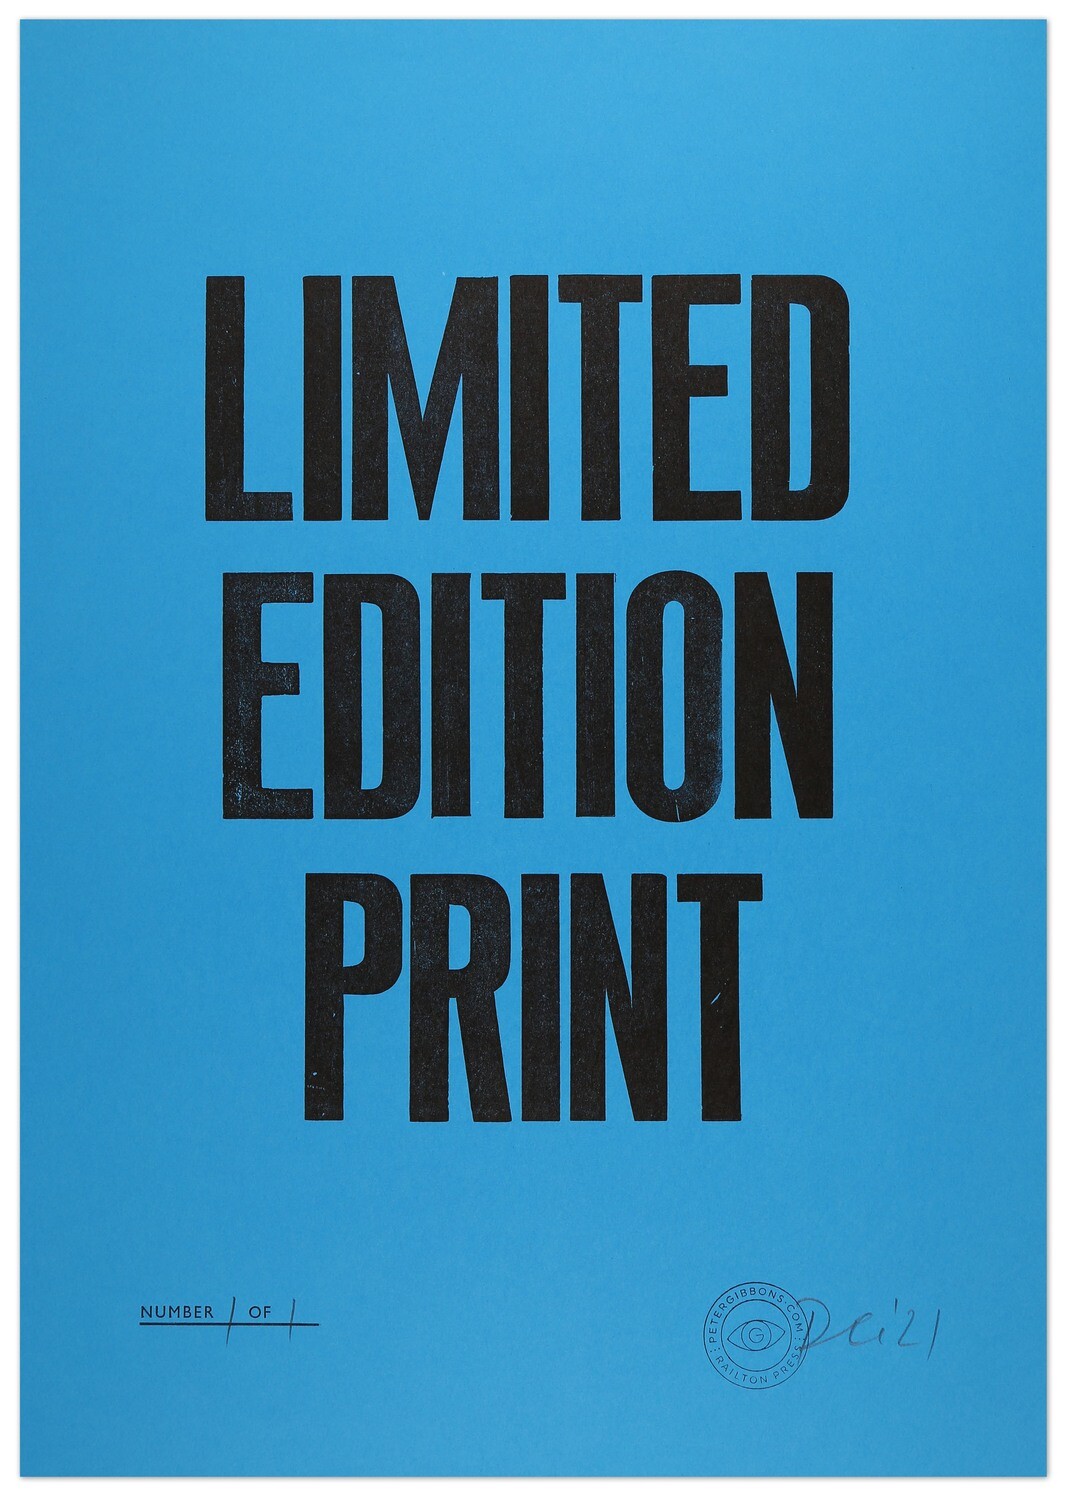 Limited Edition Print - Bright Blue